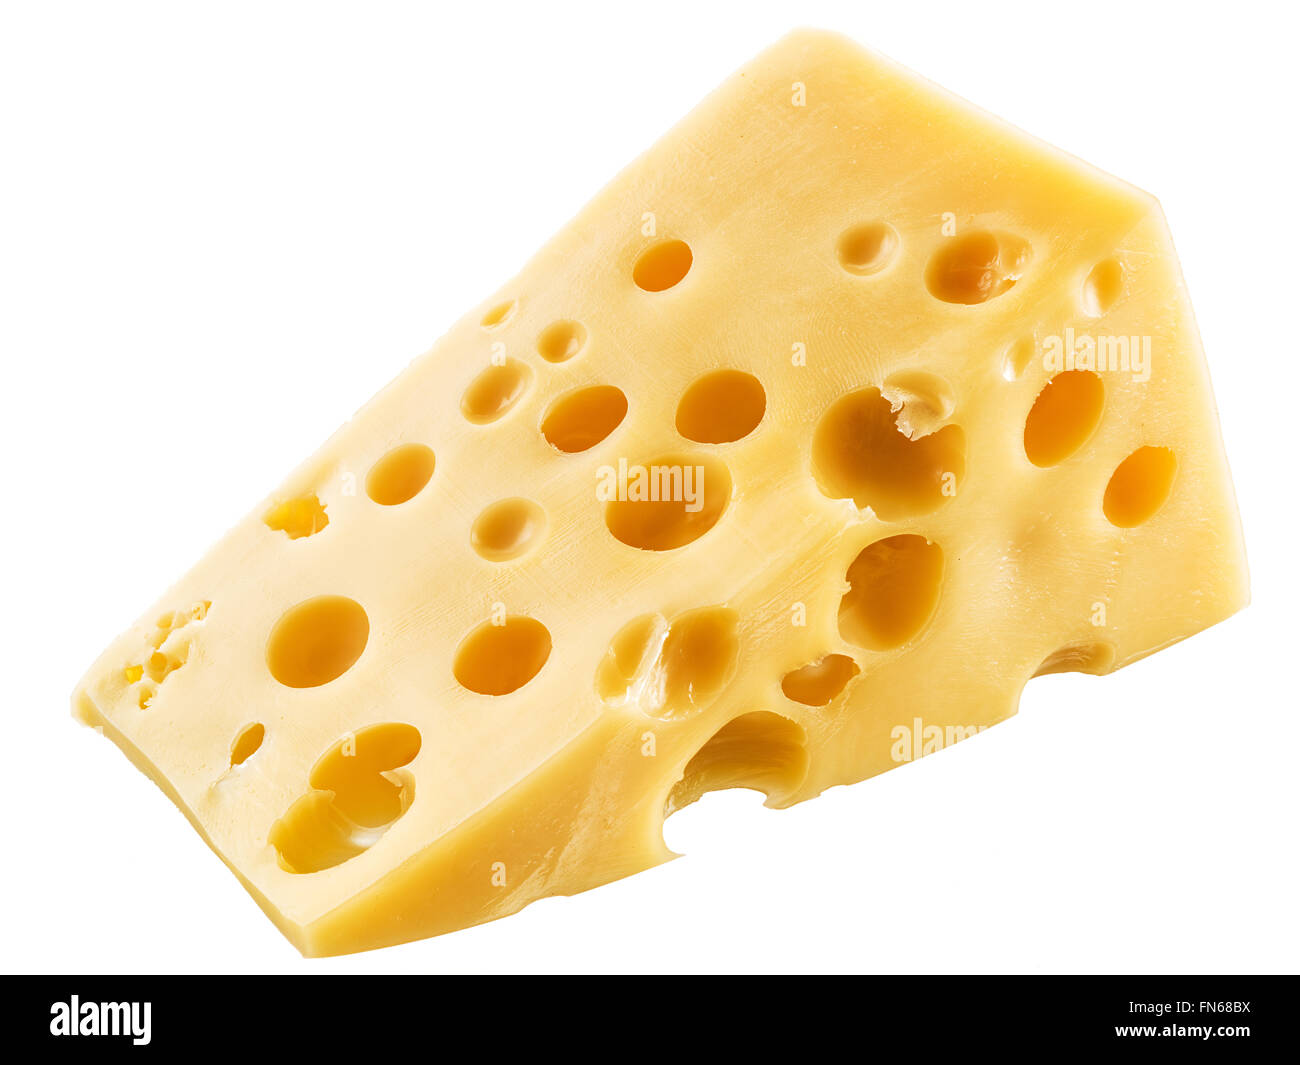 Piece of Swiss cheese. File contains clipping paths. Stock Photo